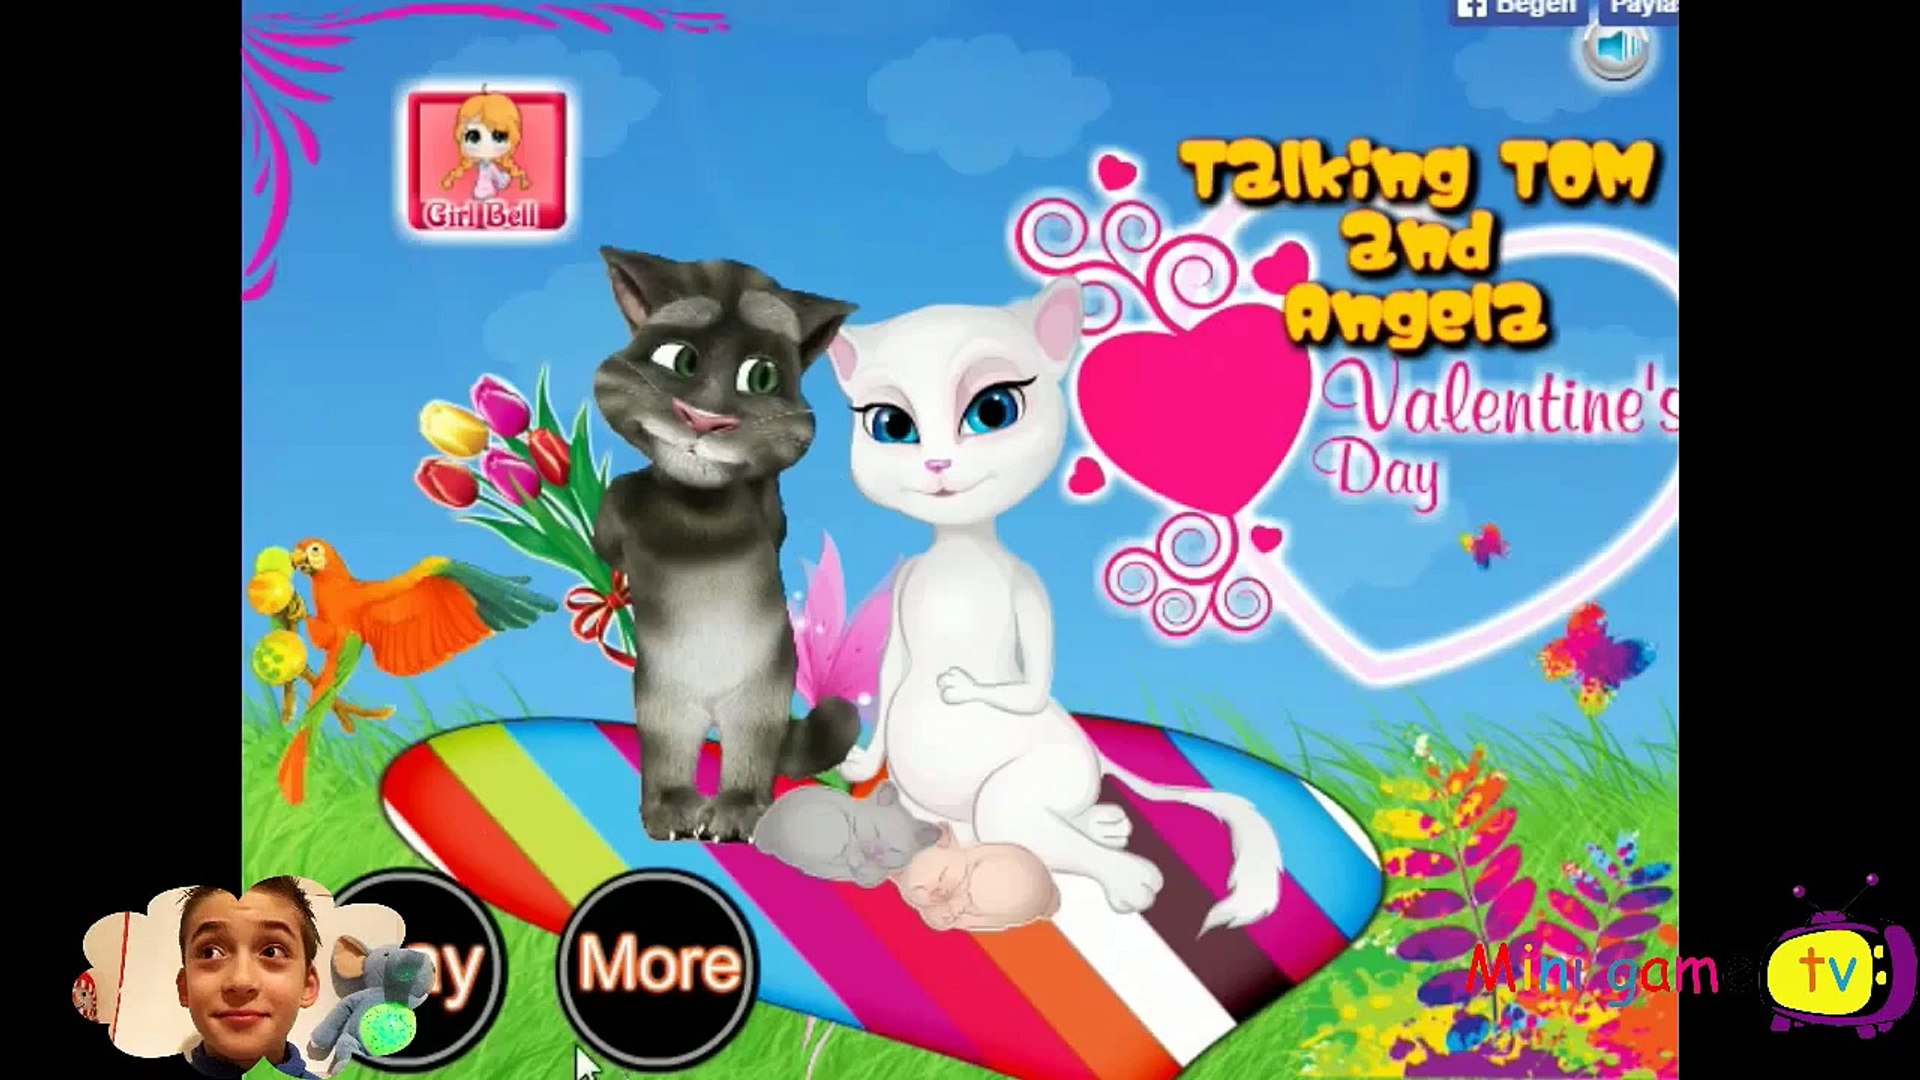 Angela Valentines Day Makeover Talking Tom Cartoon Video Games - video  Dailymotion